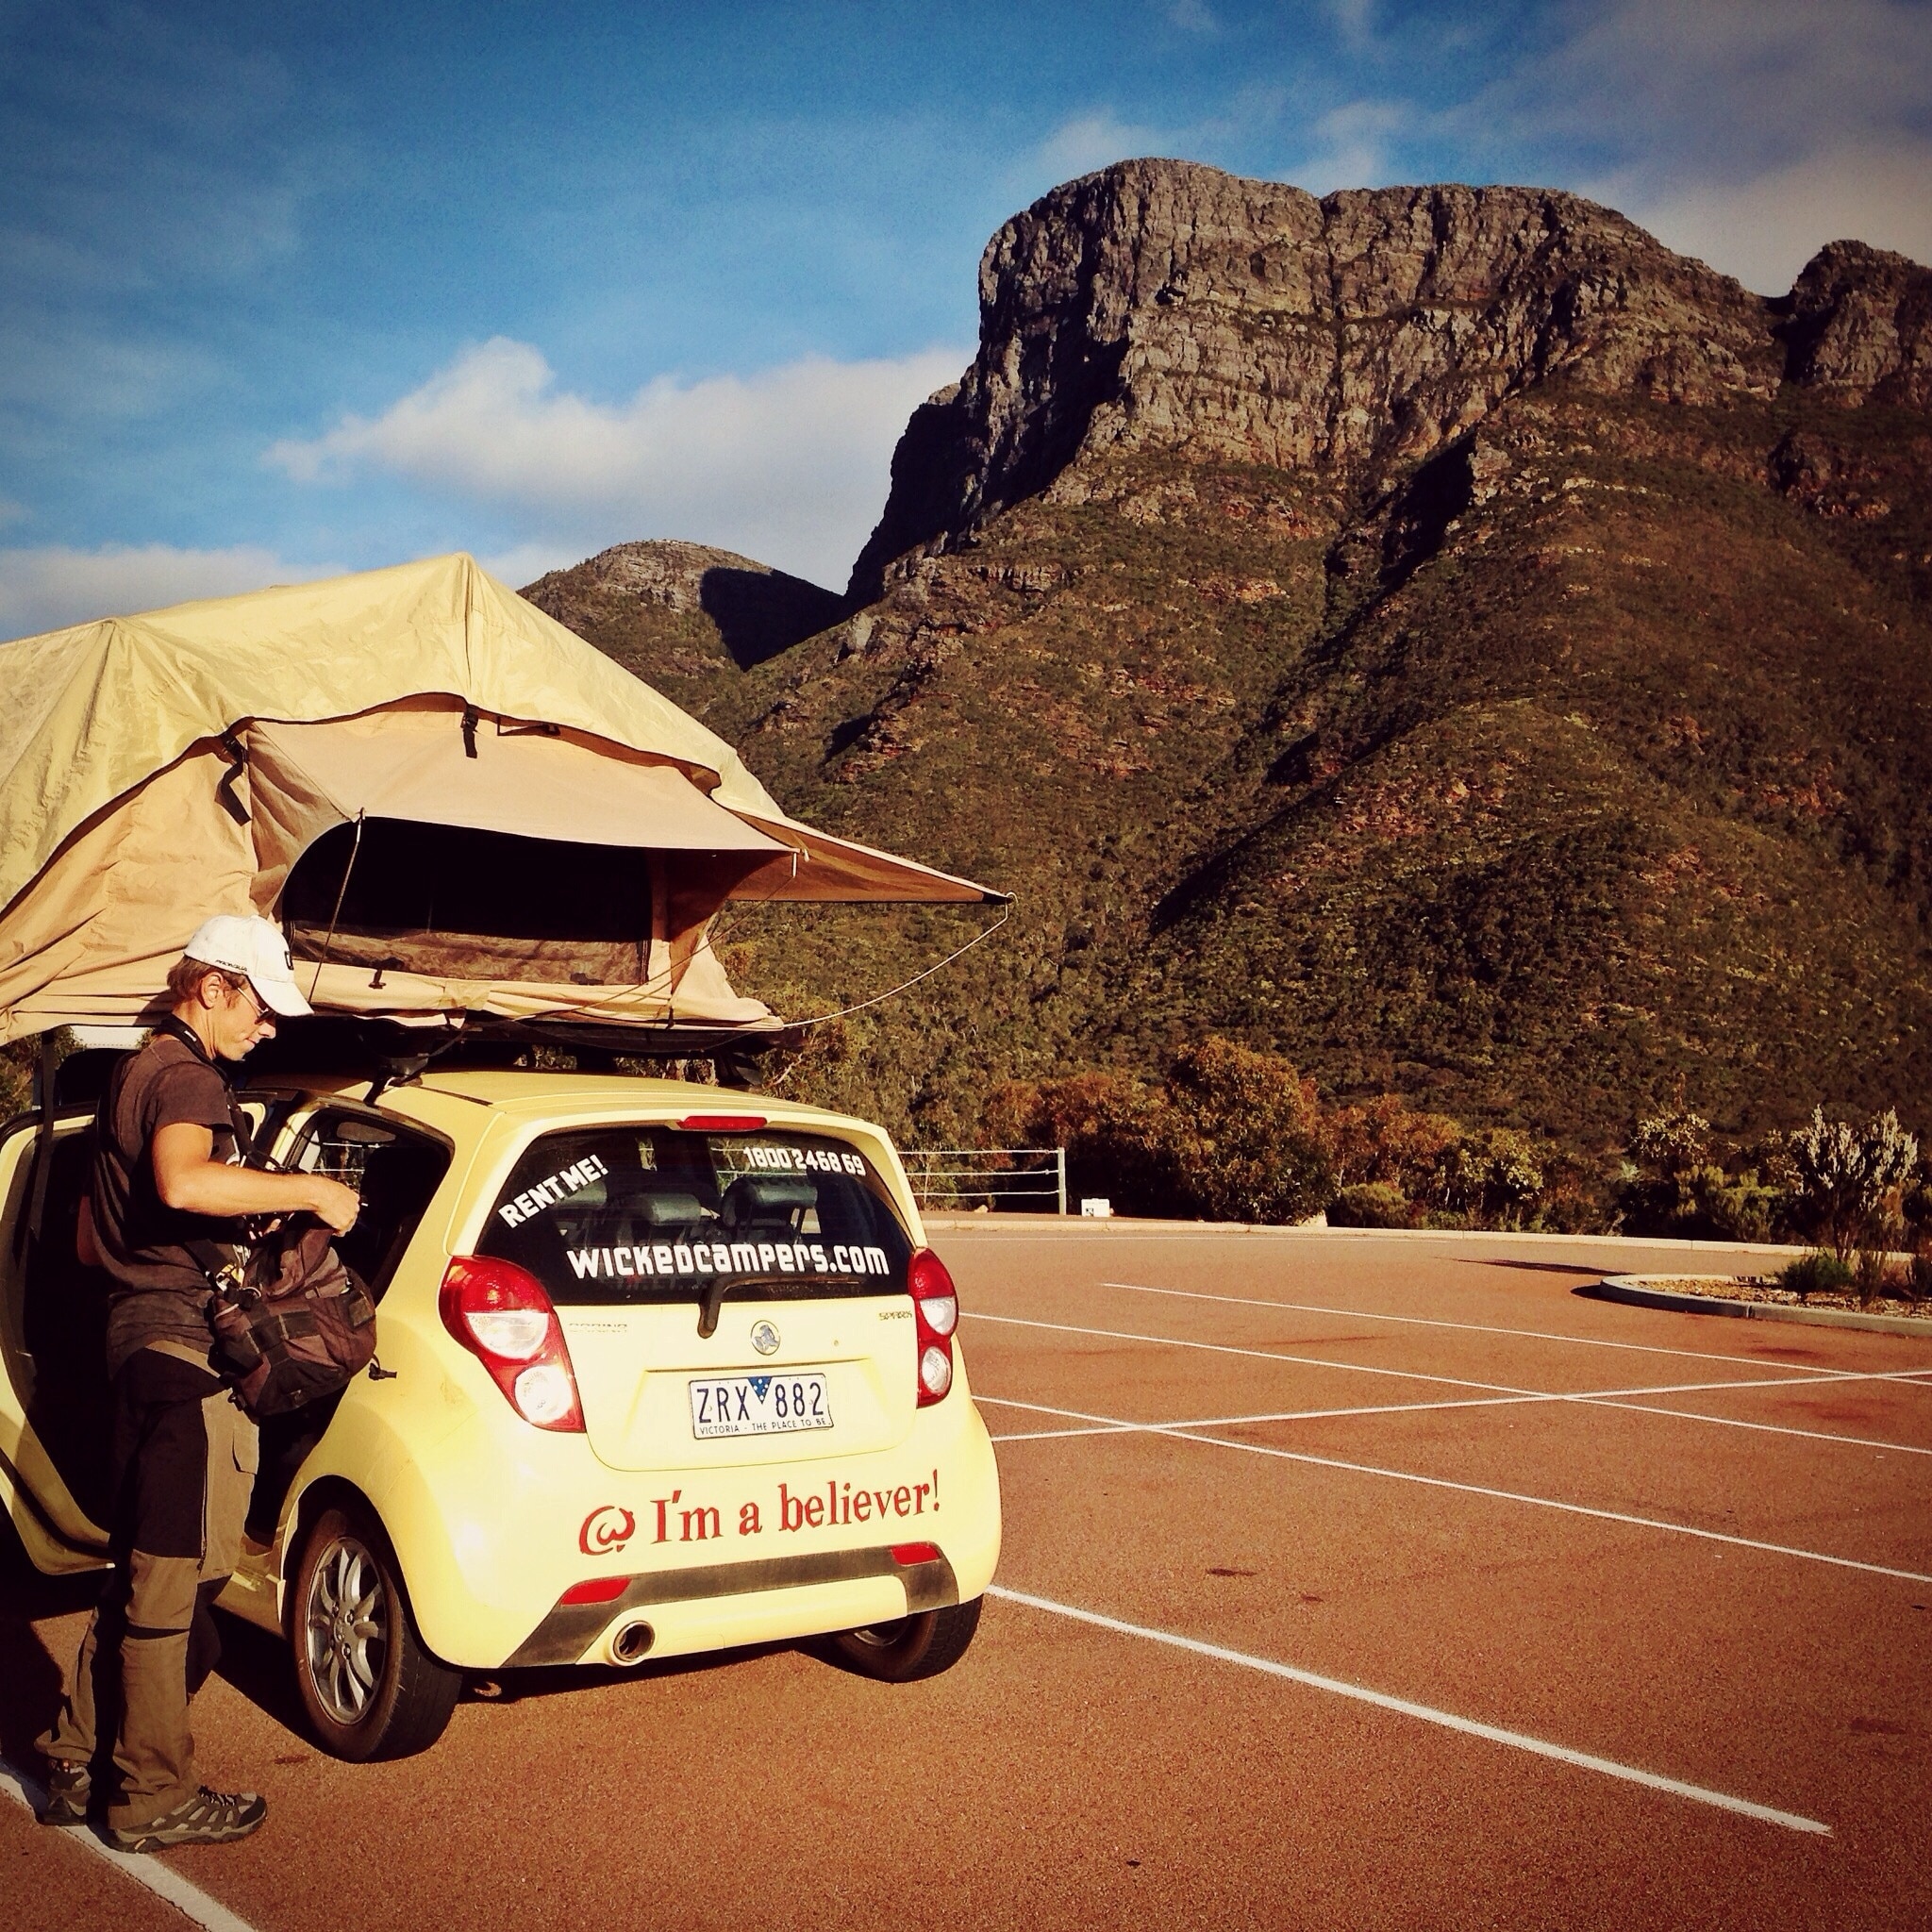 This was our wheels and accommodation for one month on the road in Western Australia. The mountain in the background is Bluff Knoll (1099 m.a.s) which we climbed later 💪 #roadtrip #nationalpark